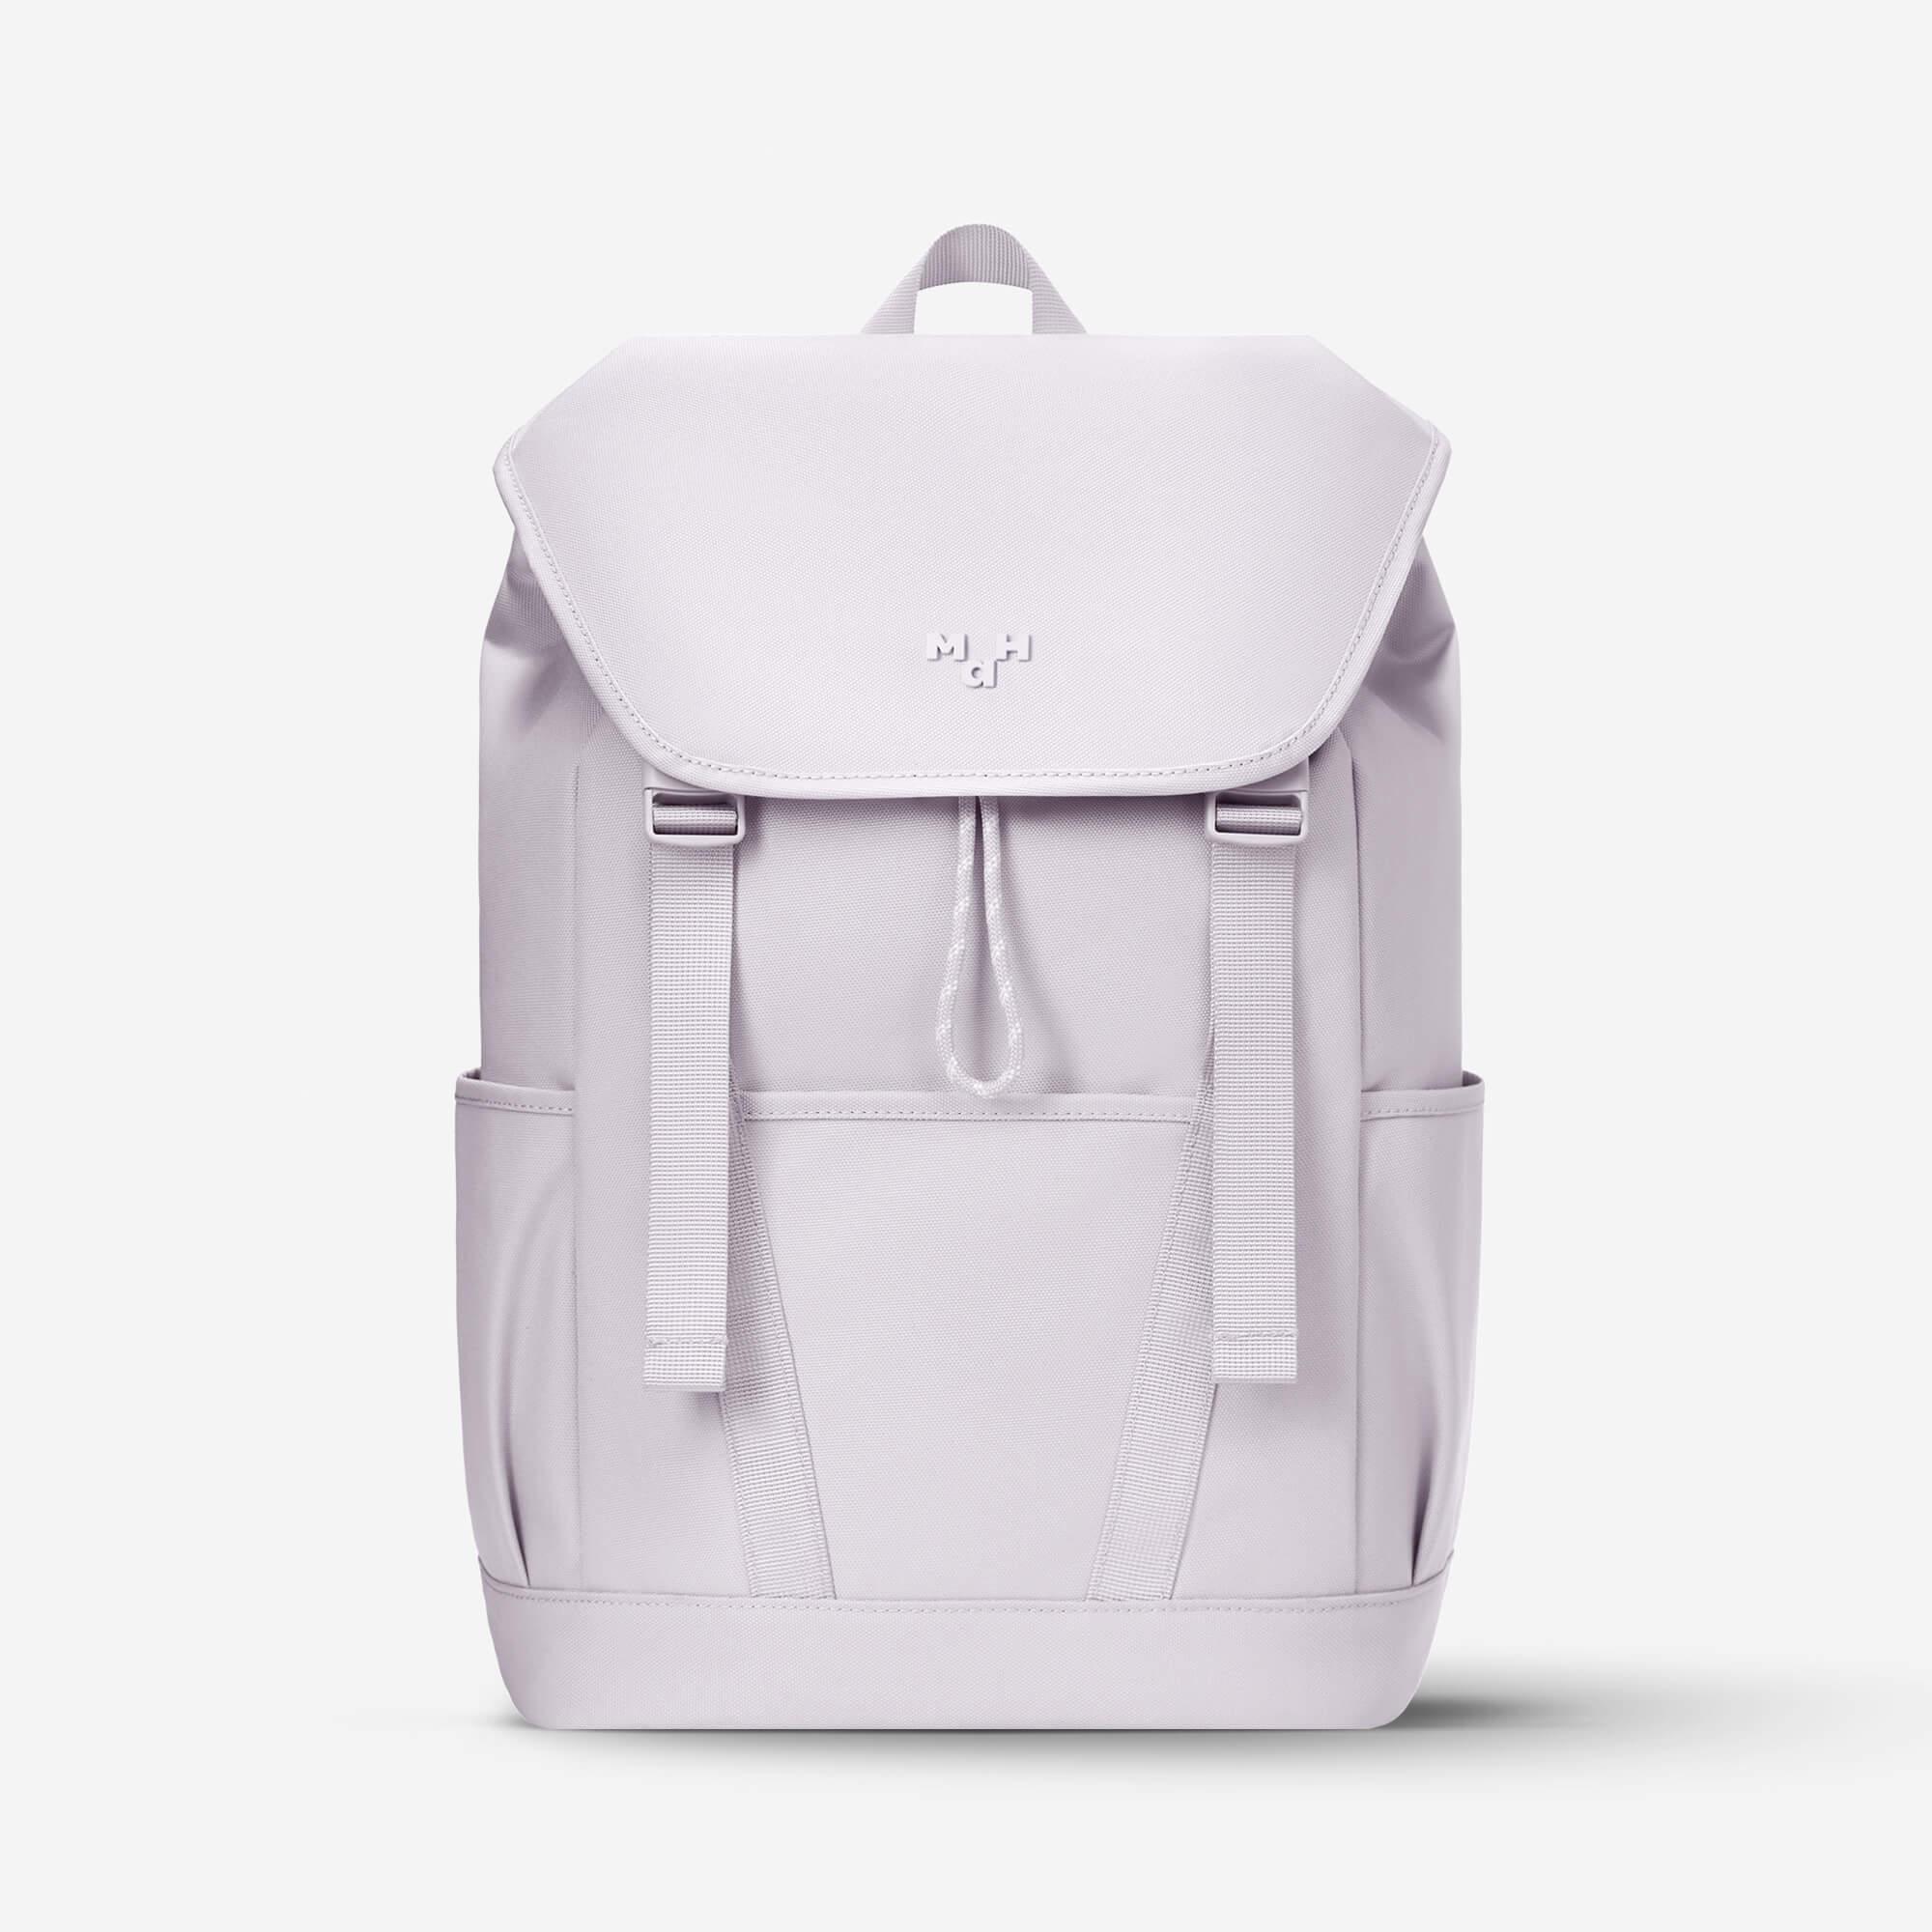 Traveling Backpack With Drawstring - Lilac